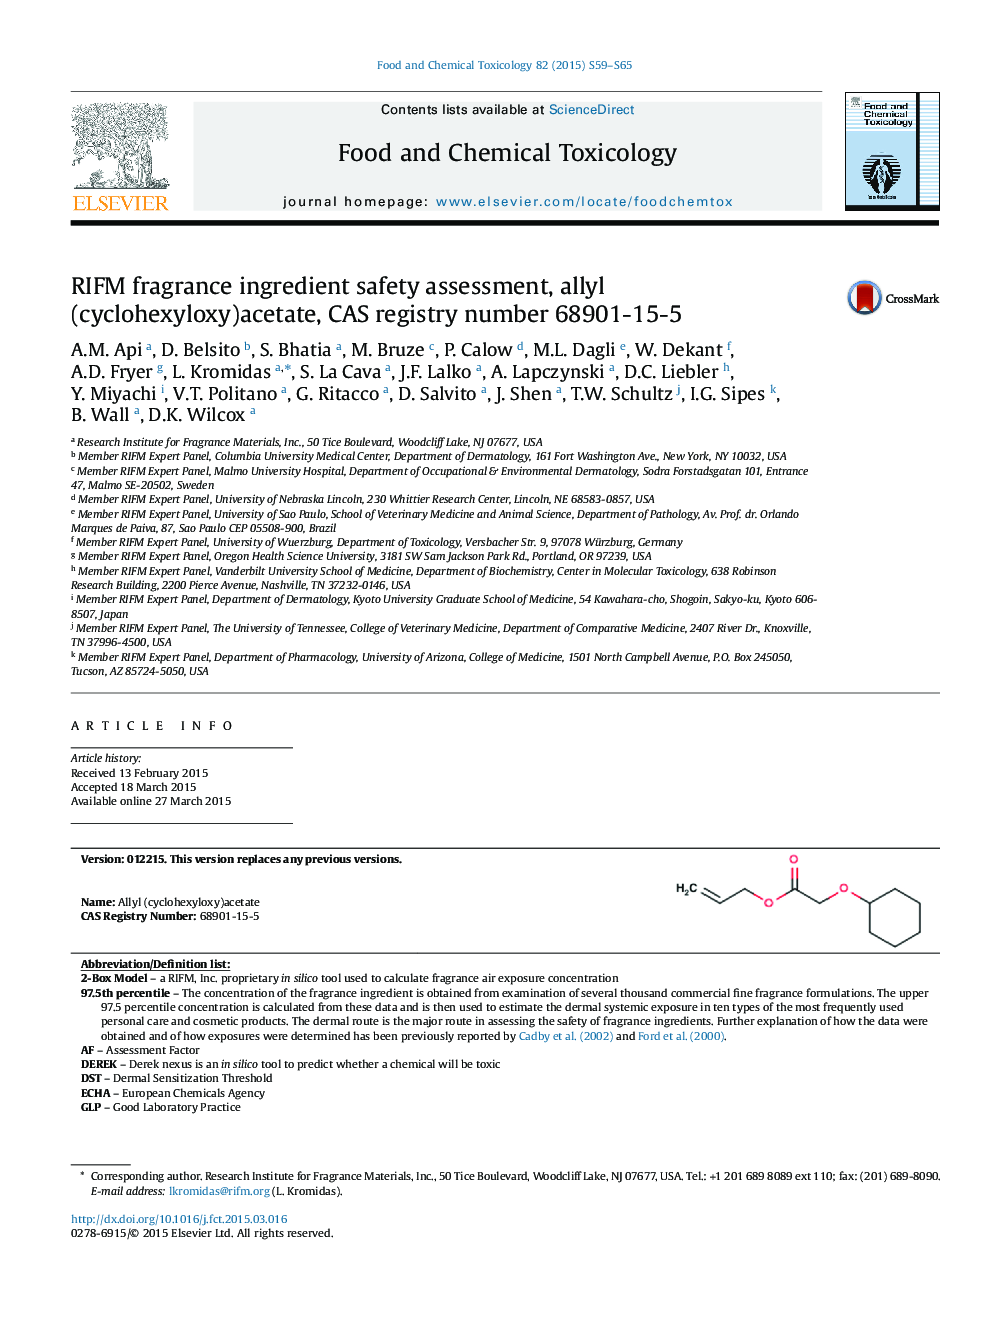 RIFM fragrance ingredient safety assessment, allyl (cyclohexyloxy)acetate, CAS registry number 68901-15-5